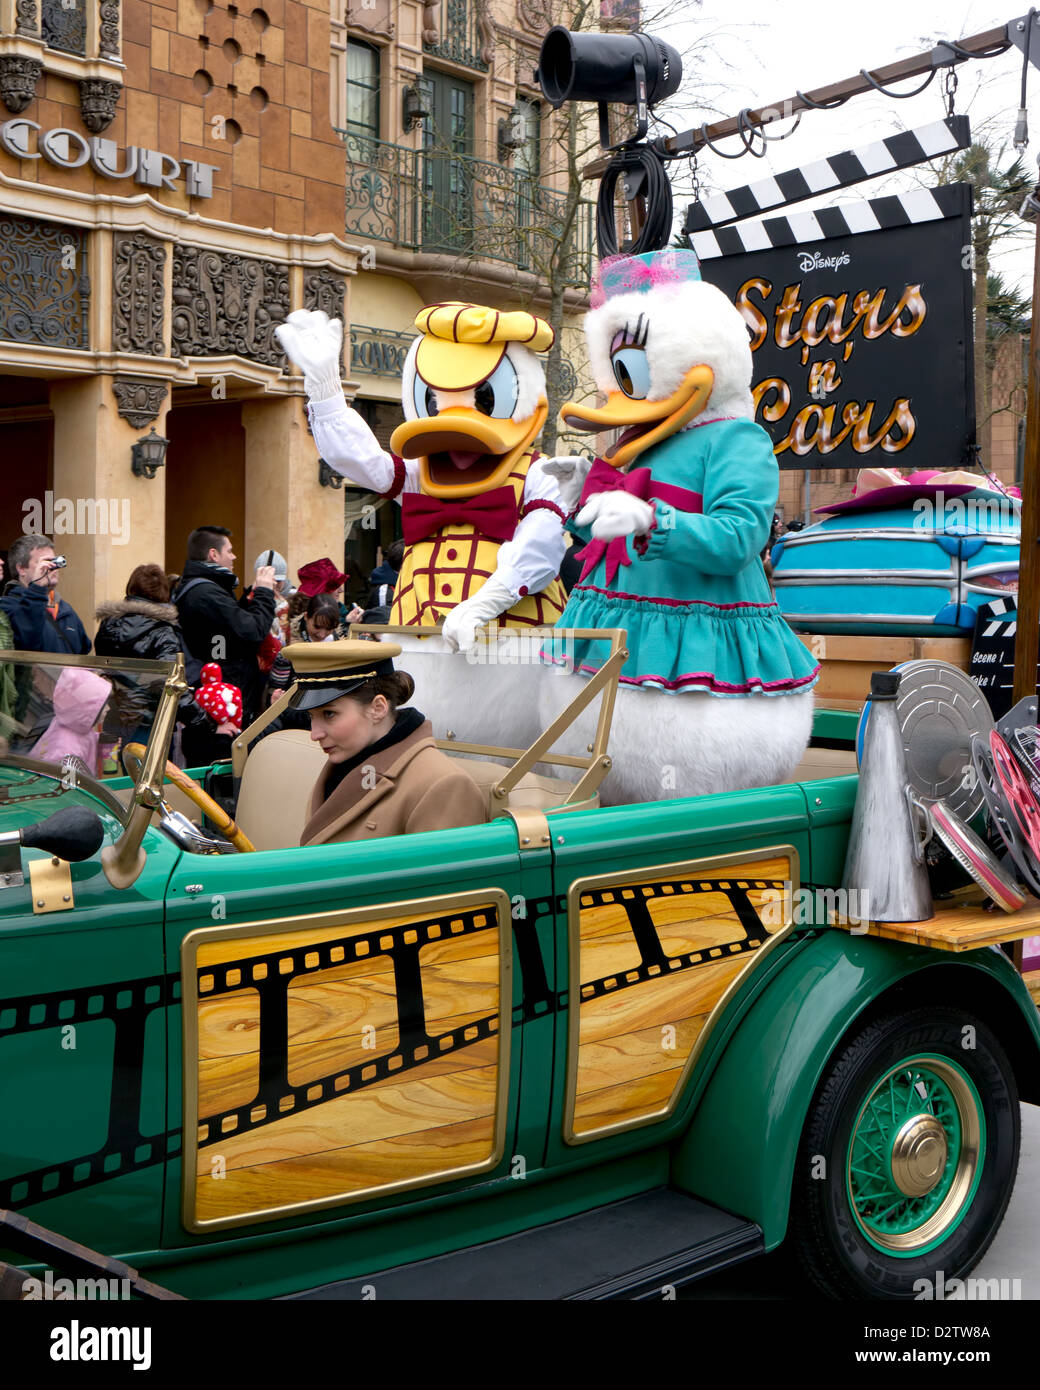 Donald Duck and Daisy Duck taking part in Disney's Stars n Cars Parade at Disneyland Paris Stock Photo